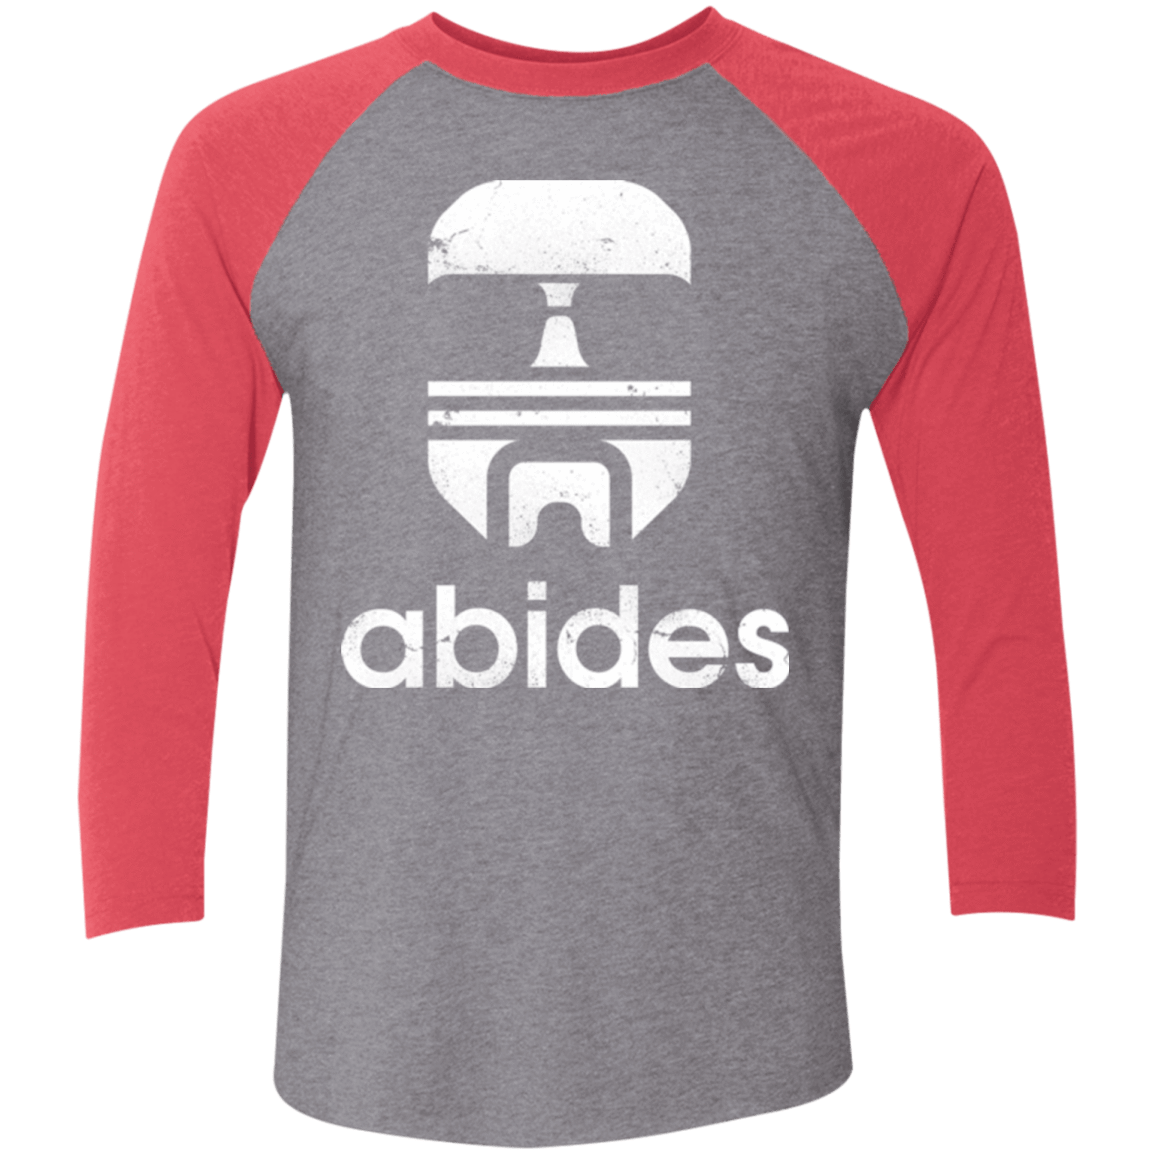 T-Shirts Premium Heather/ Vintage Red / X-Small Abides Men's Triblend 3/4 Sleeve